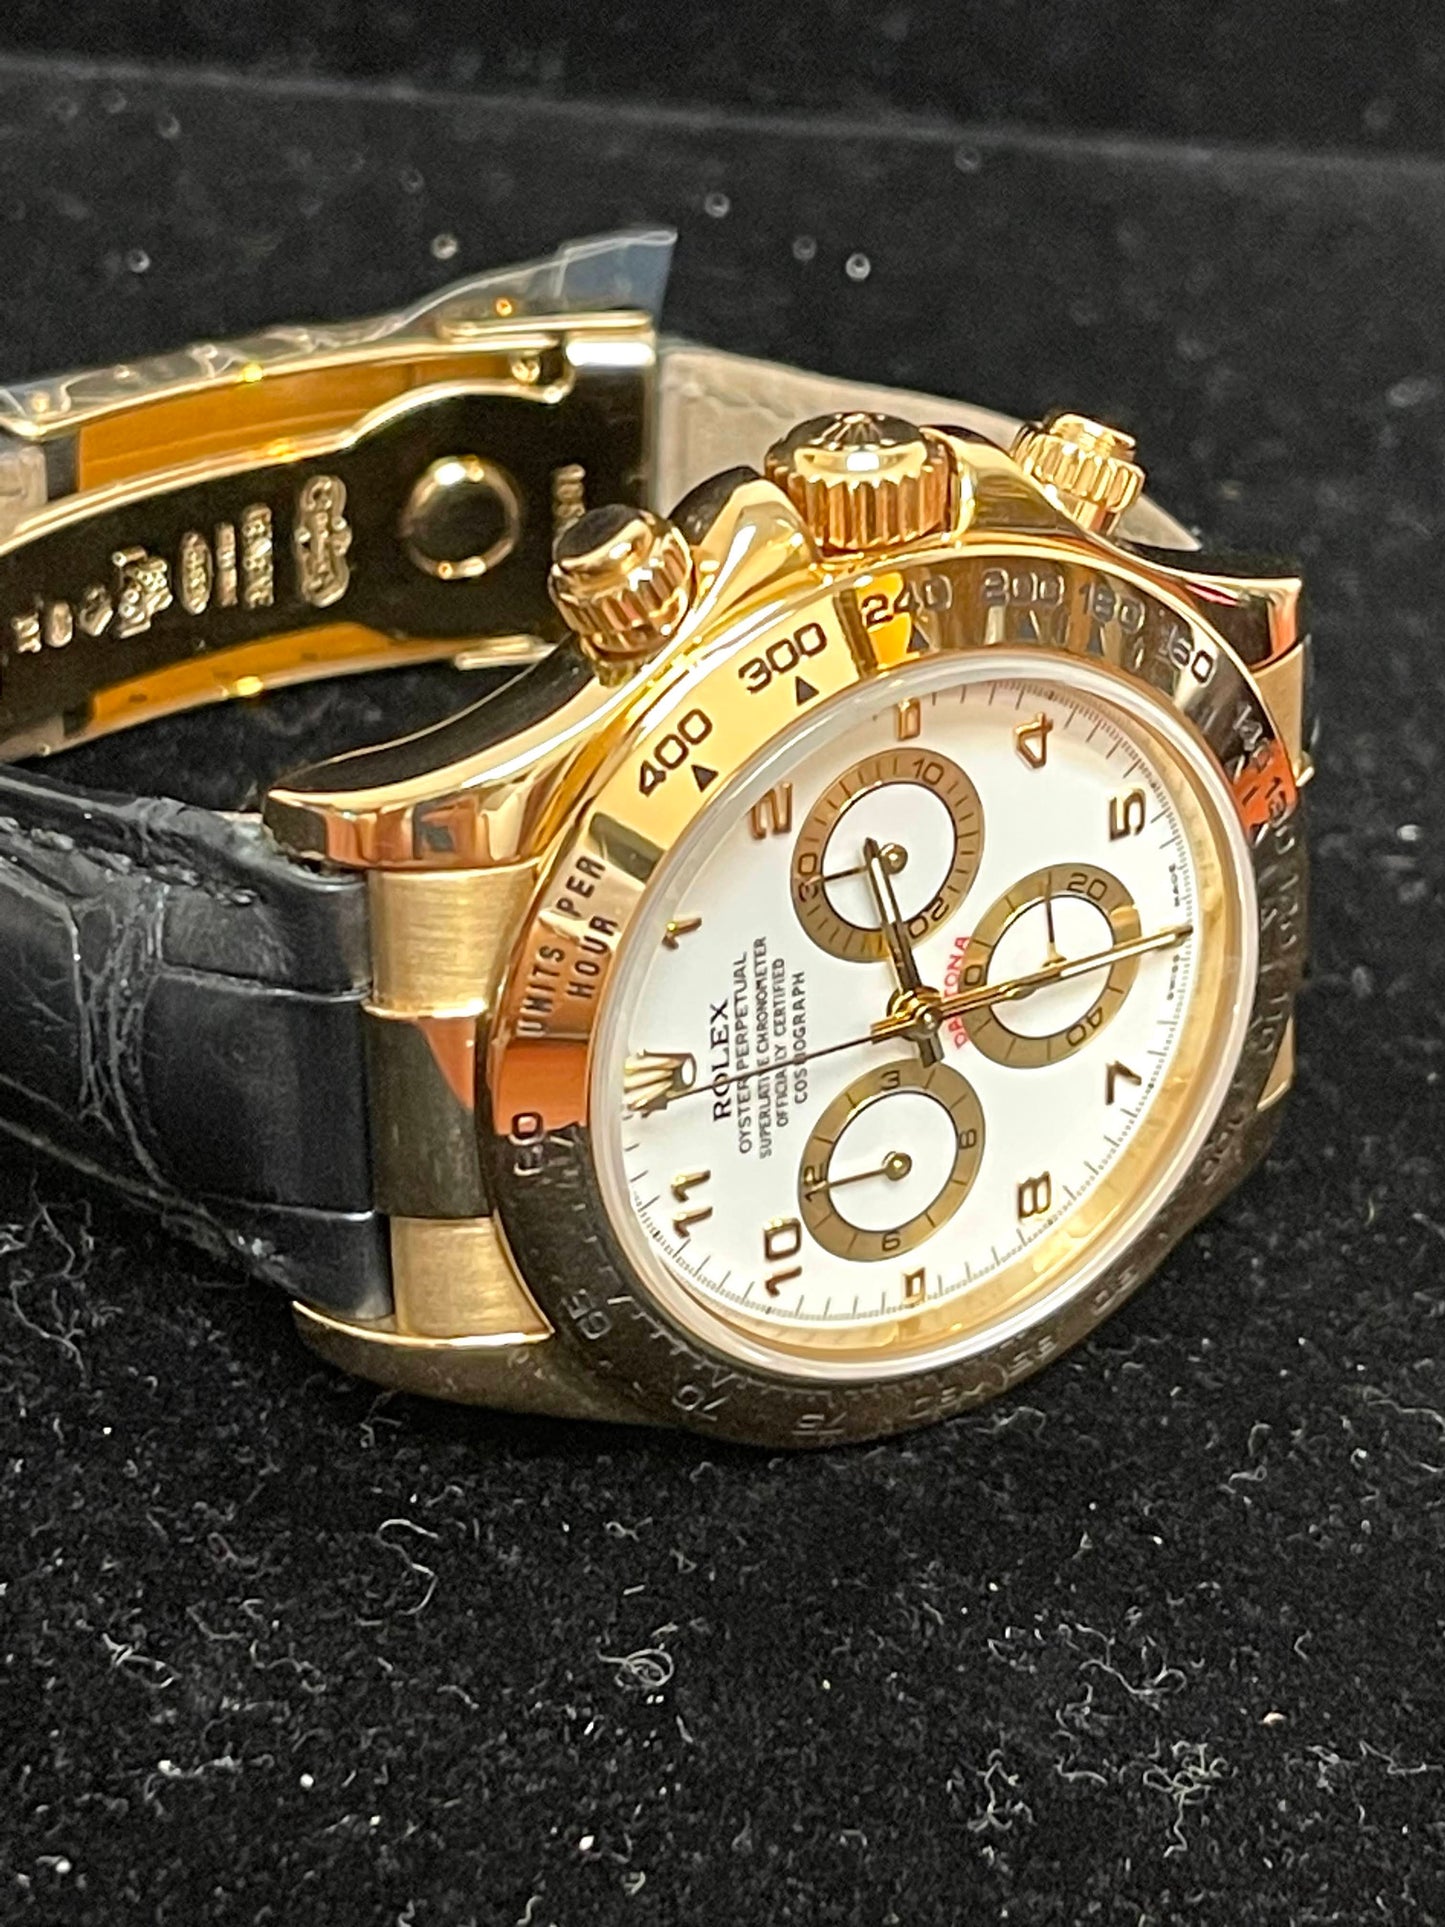 2002 Rolex Daytona 116518 White Dial 18kt Black Leather Strap No Papers 40mm